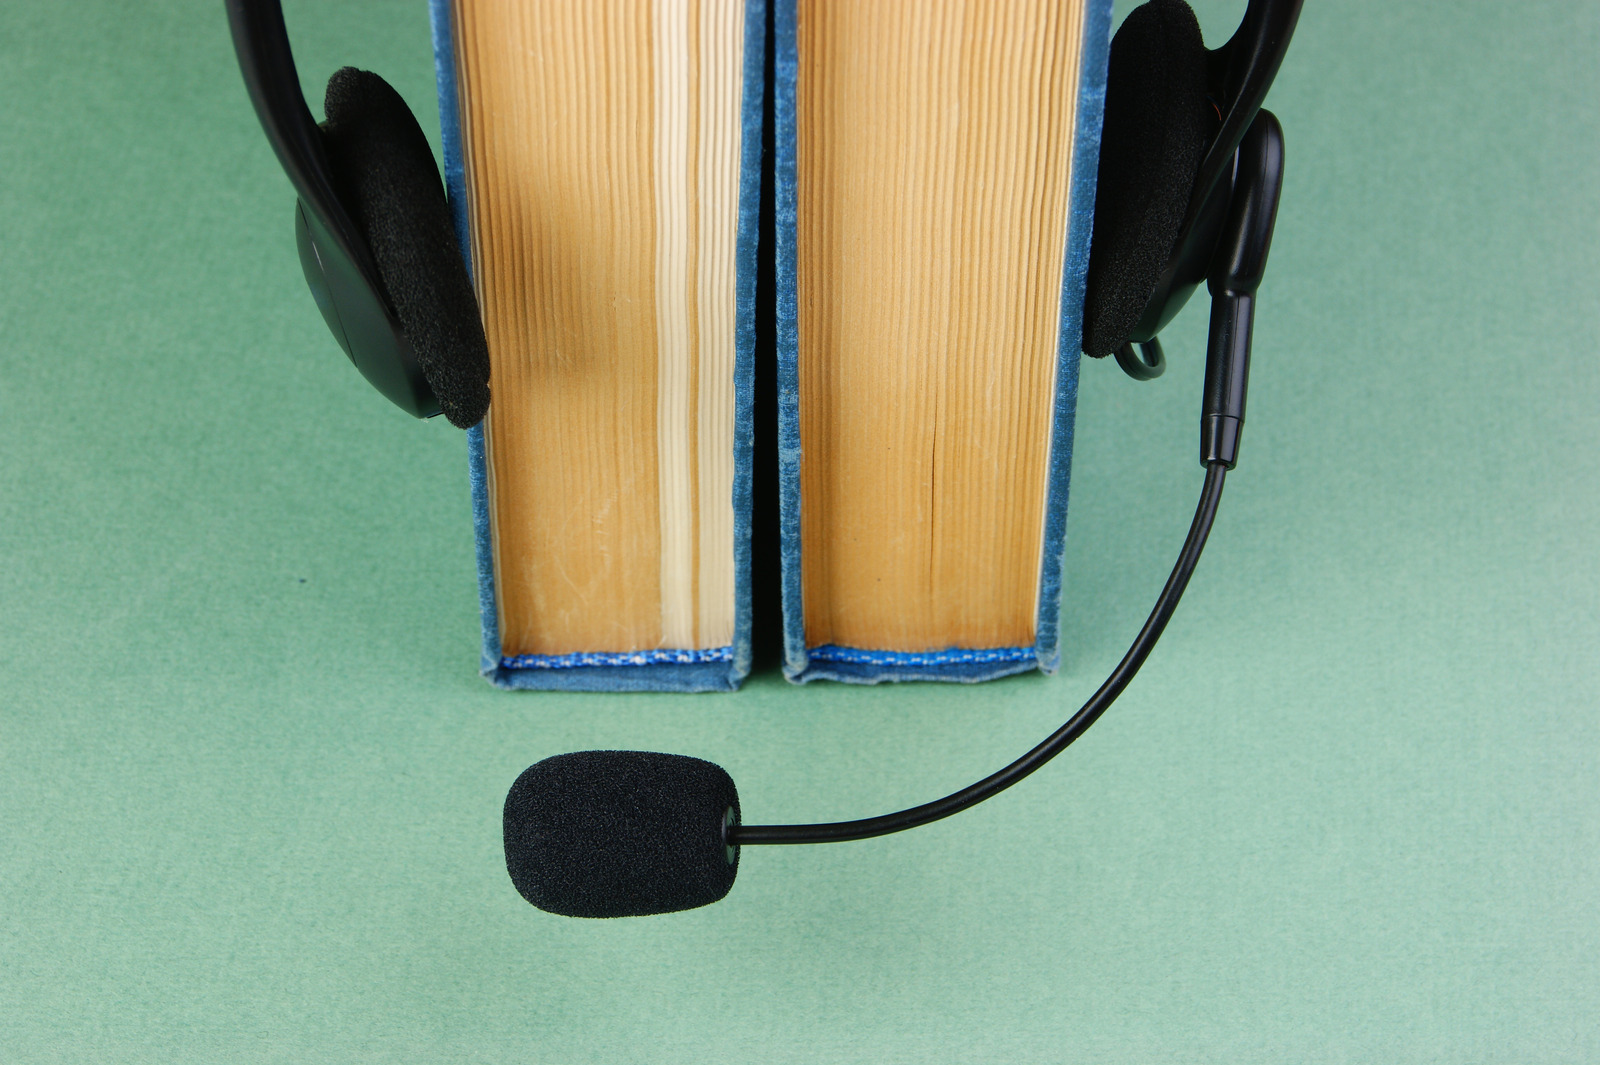 Headphones with a microphone and a stack of books on a green background